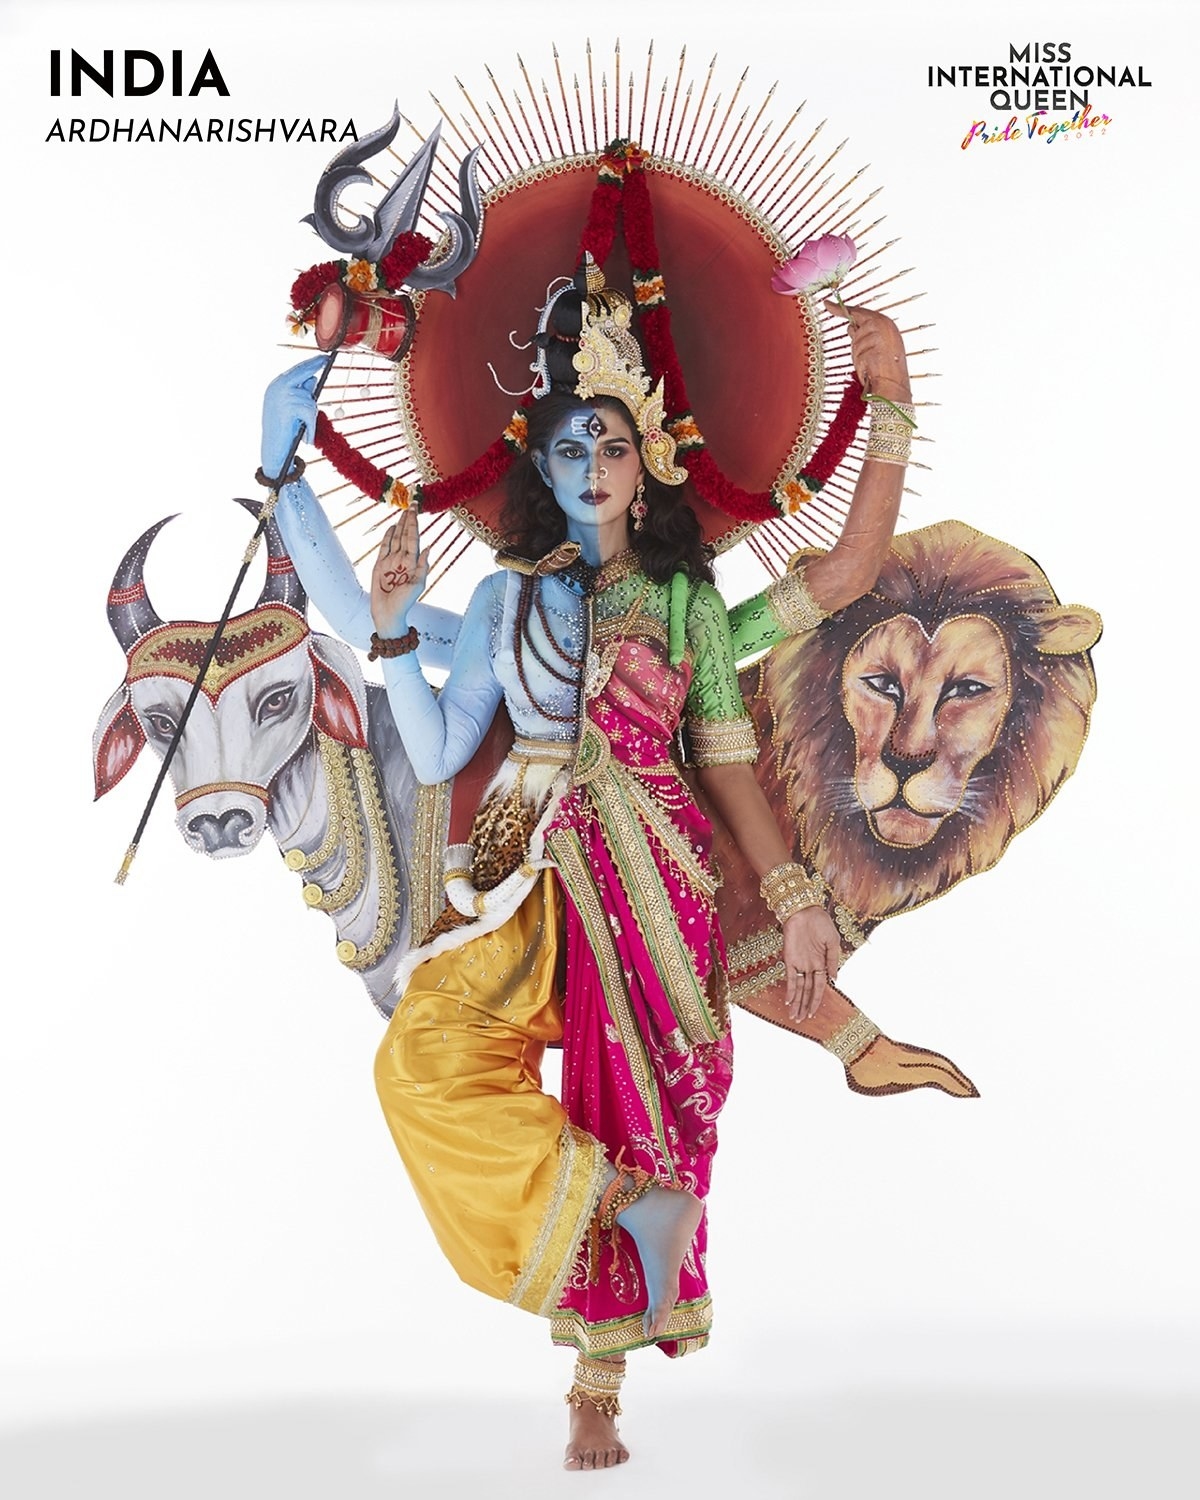 Miss India in an outfit that reflects Hindu god Shiva